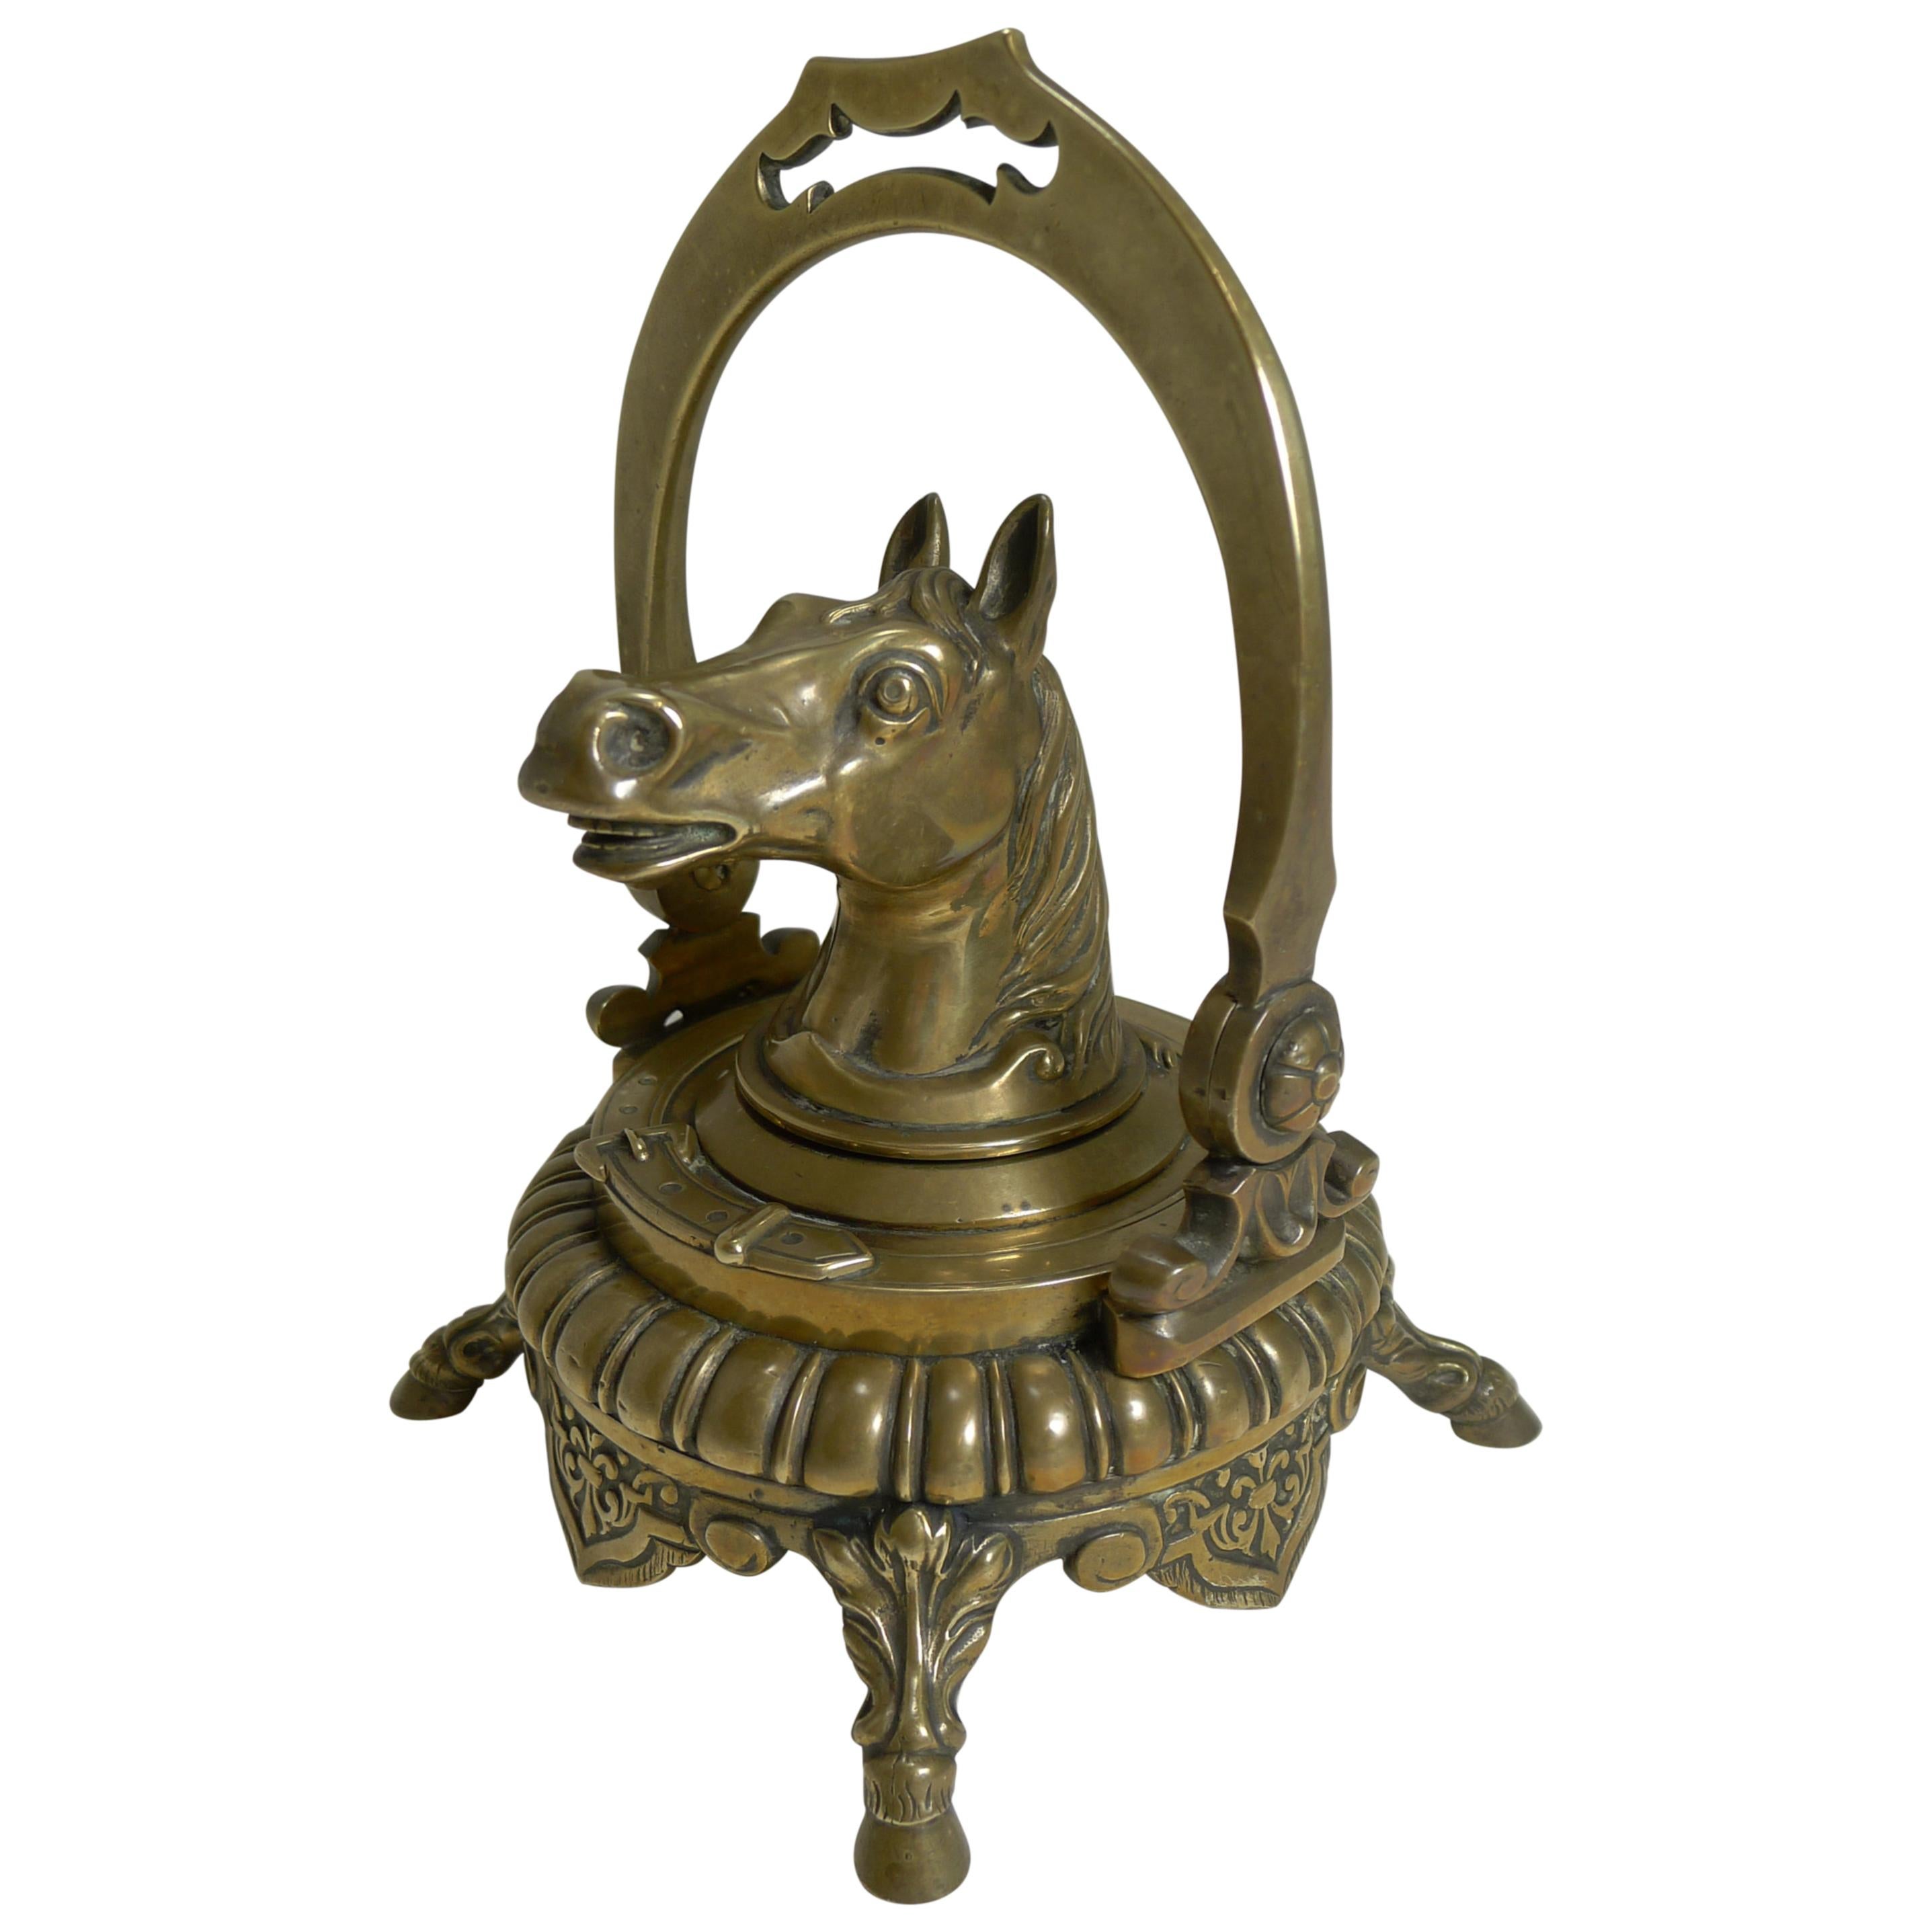 Antique English Novelty Equestrian Inkwell, Horse, circa 1880